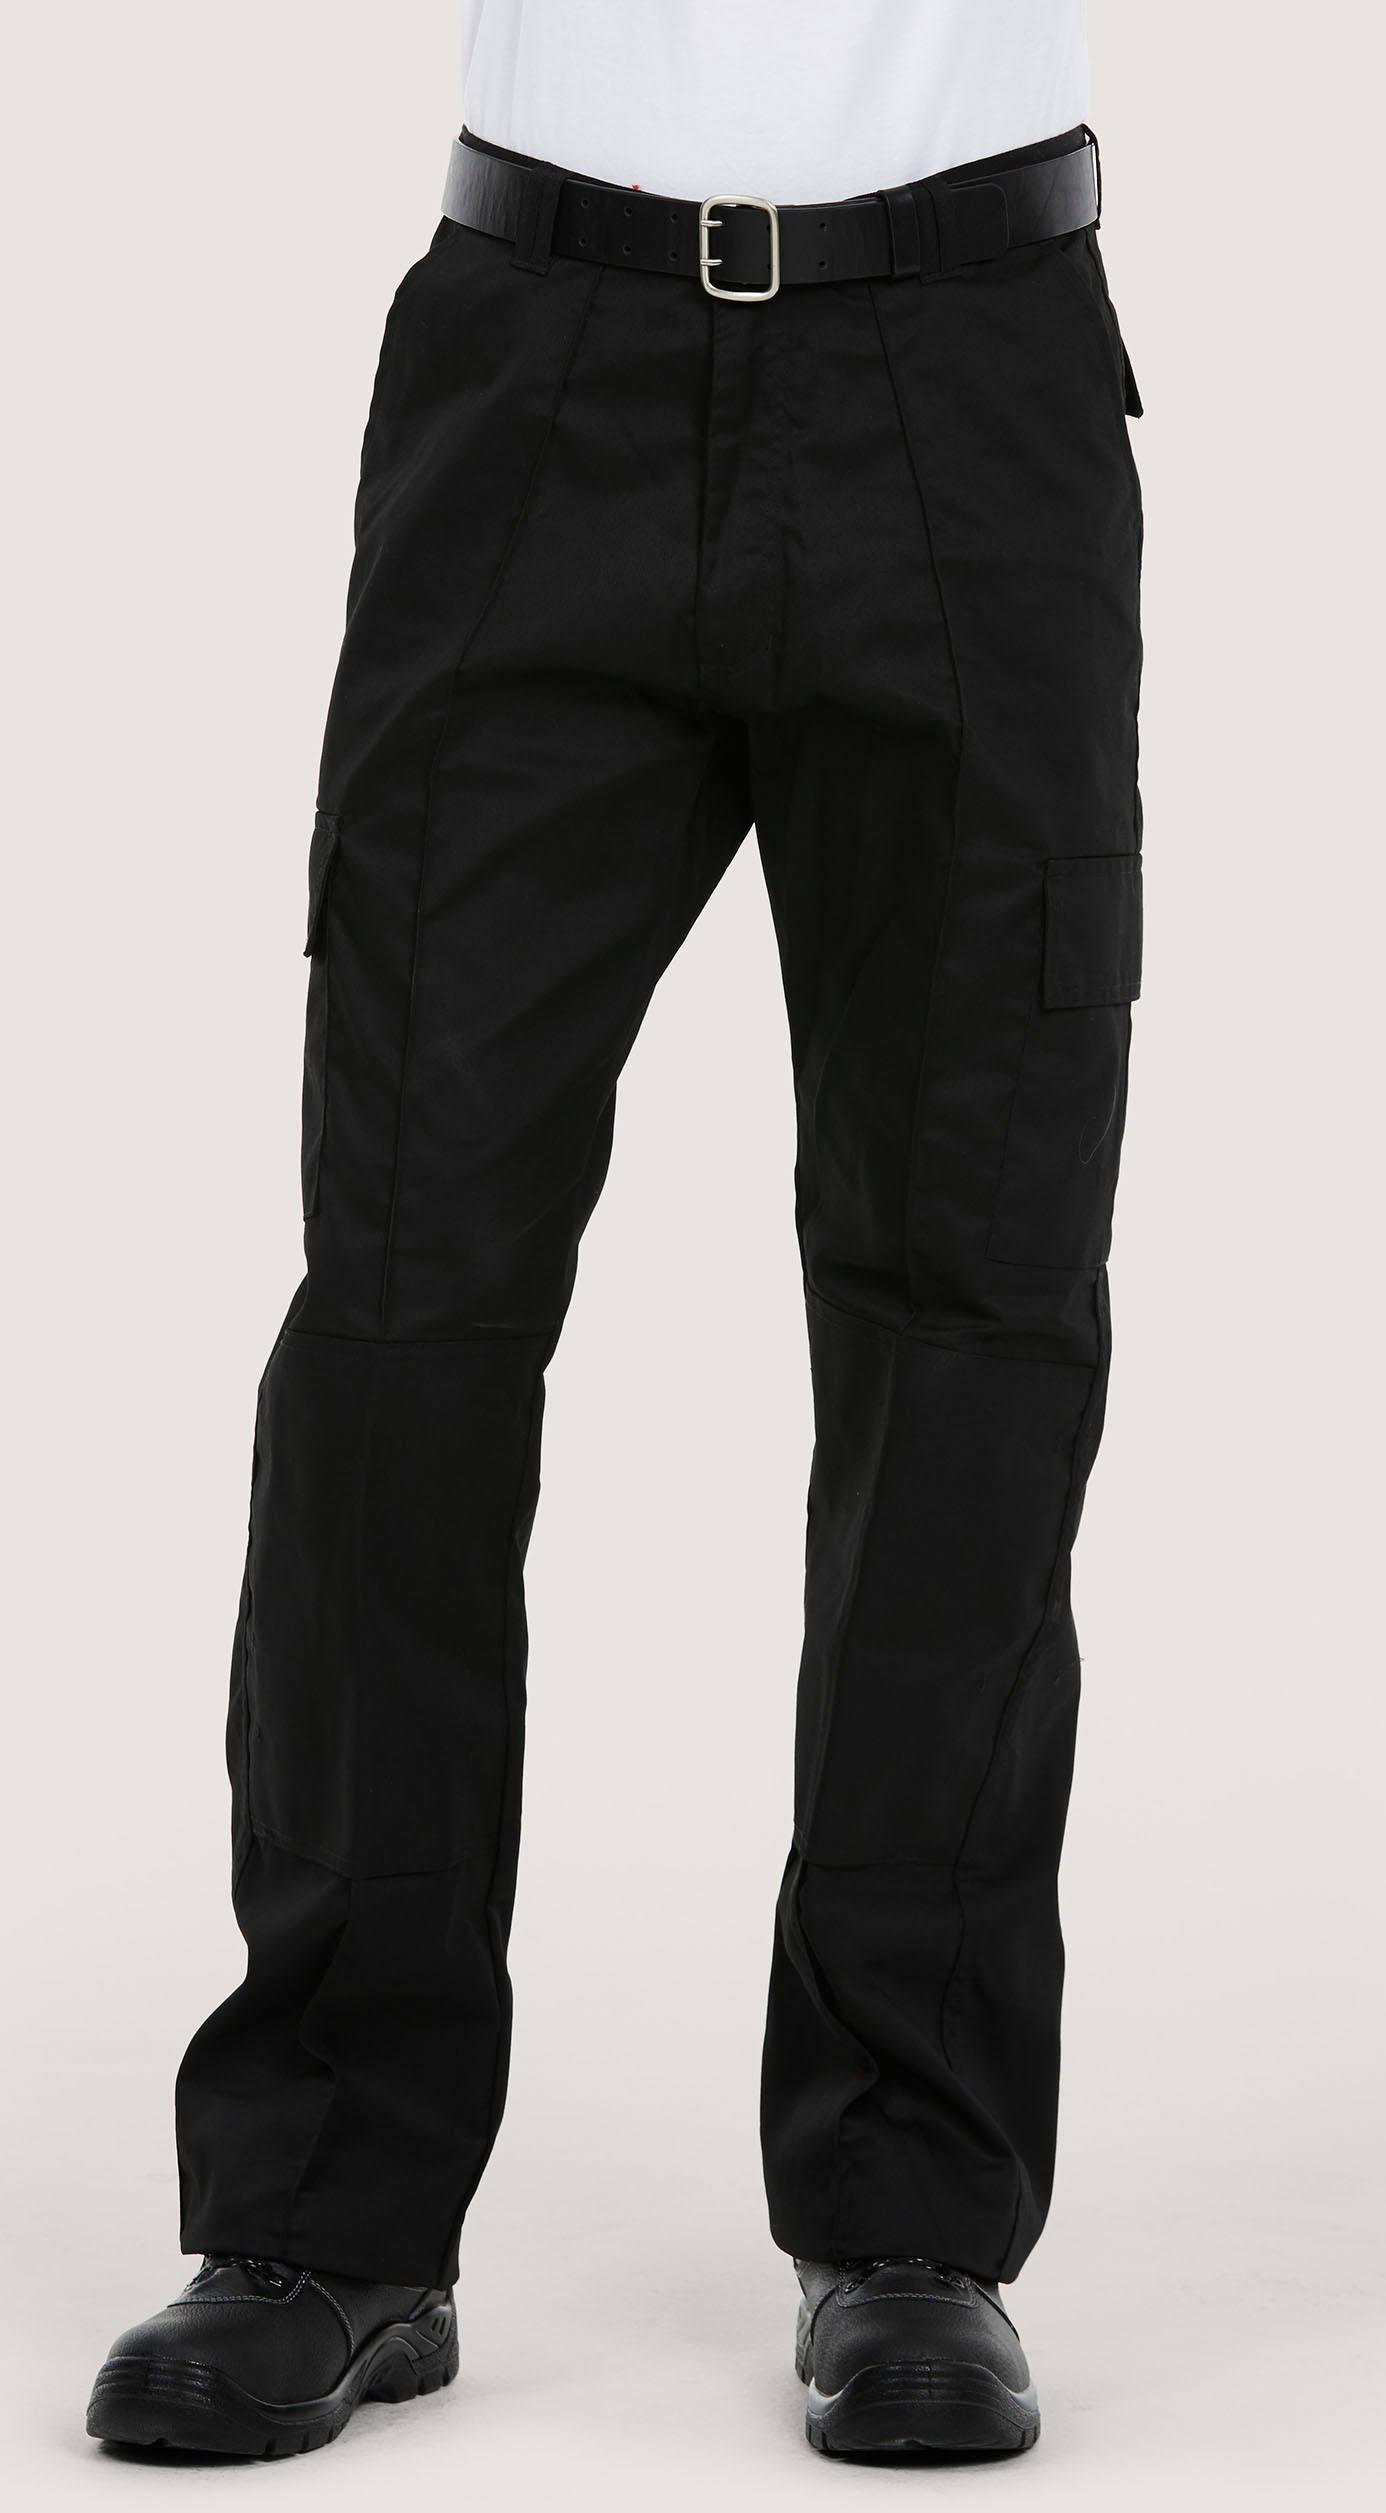 Uneek Combat Cargo trousers UC904 with Knee pad pockets